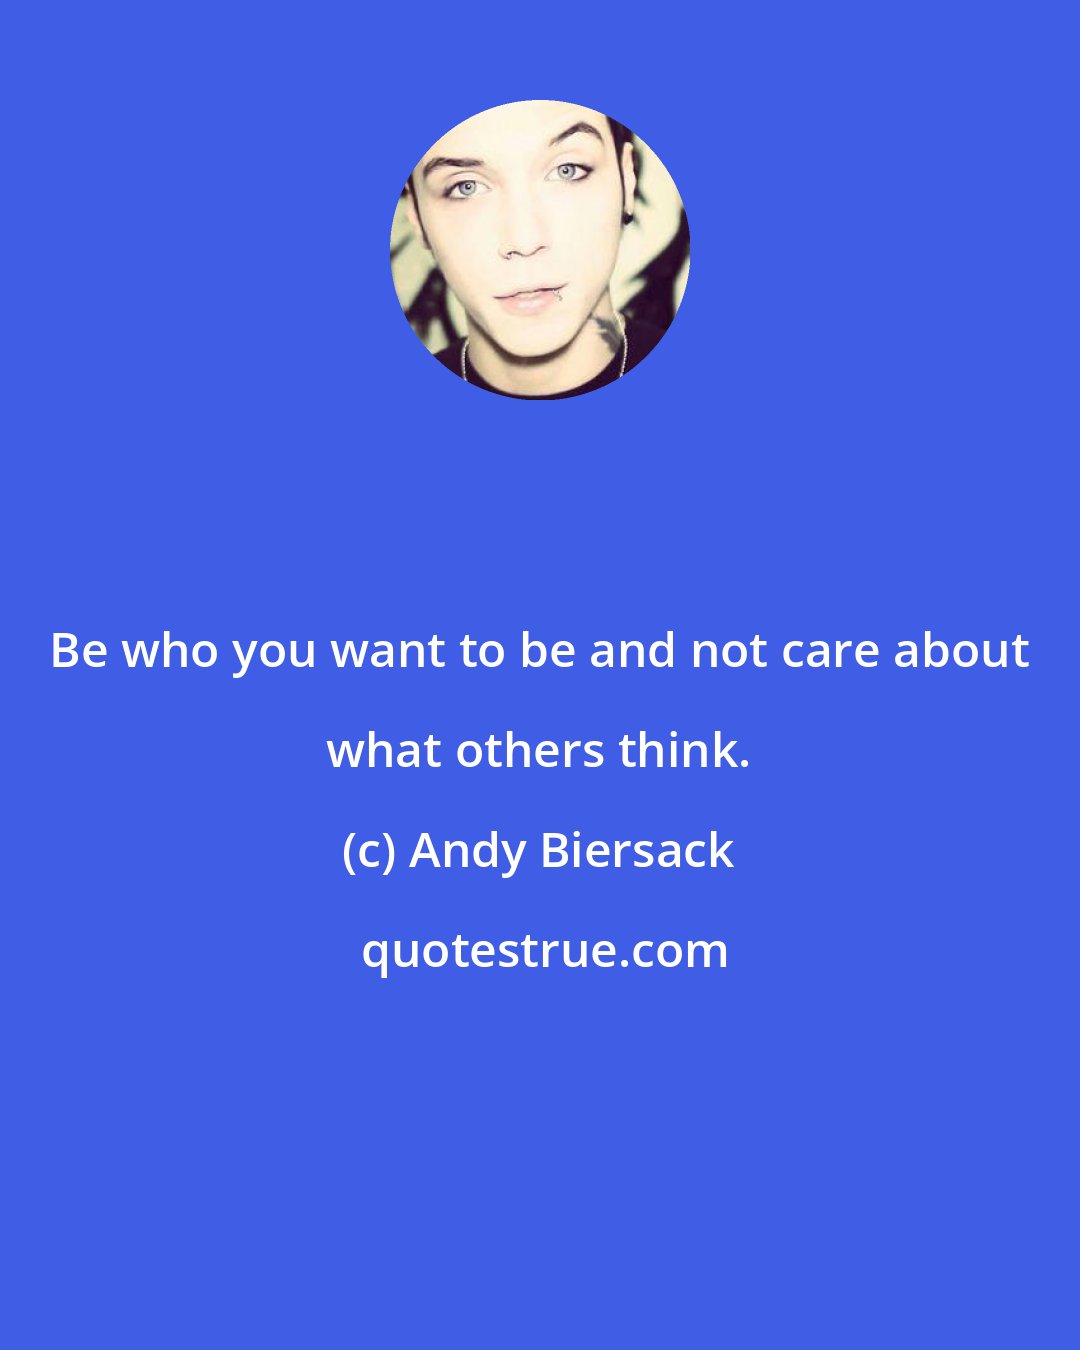 Andy Biersack: Be who you want to be and not care about what others think.